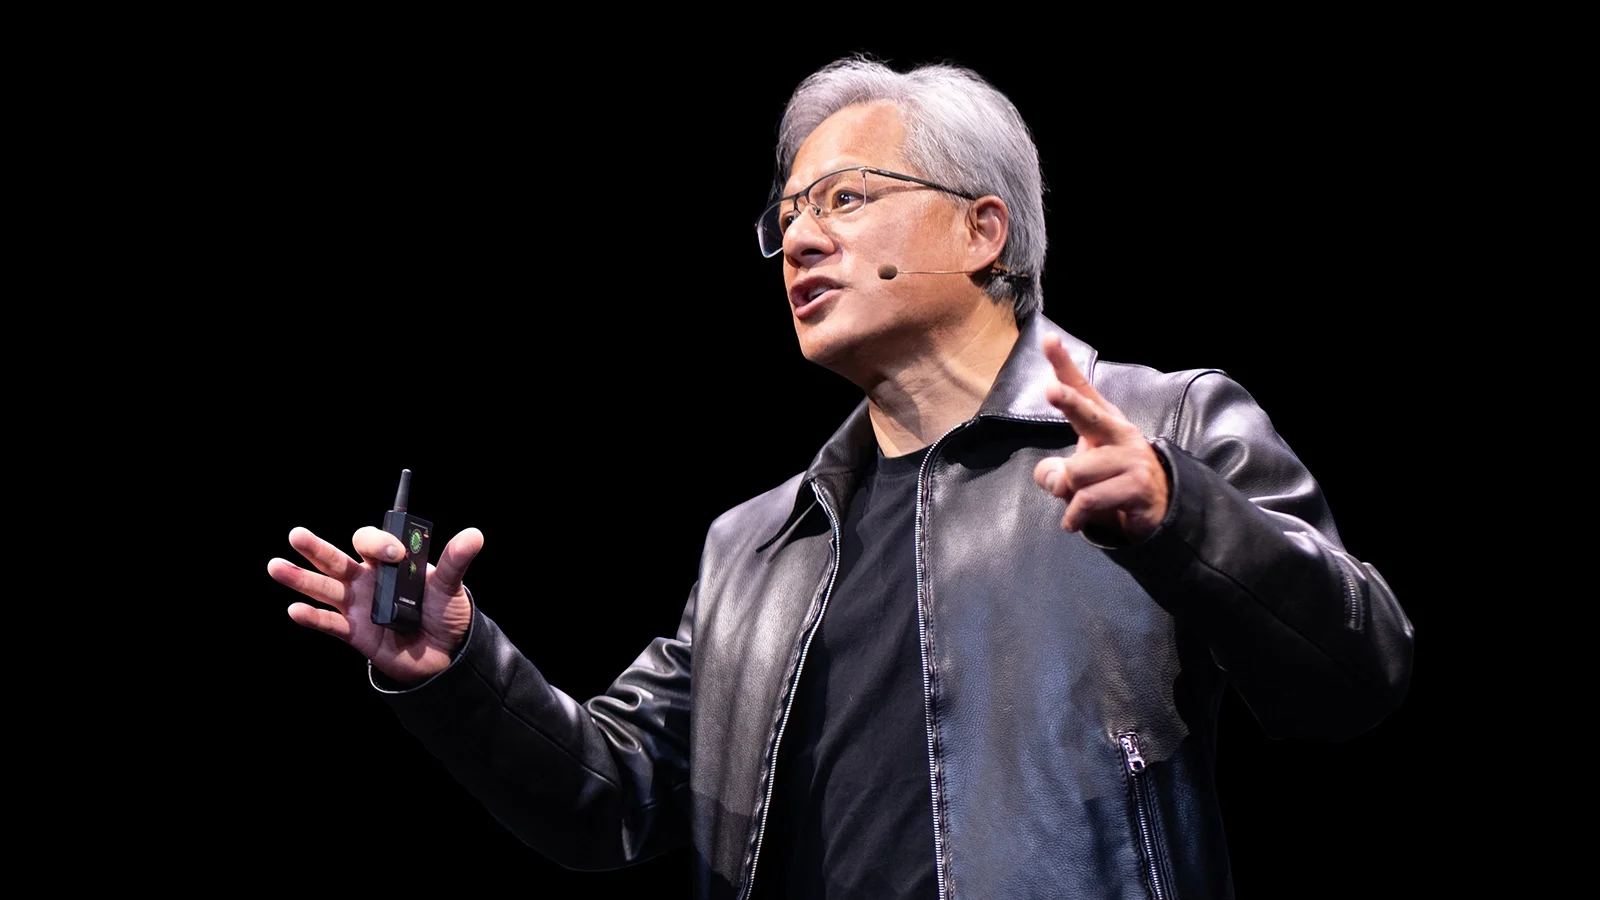 Nvidia CEO: latest AI chip to power “new industrial revolution”